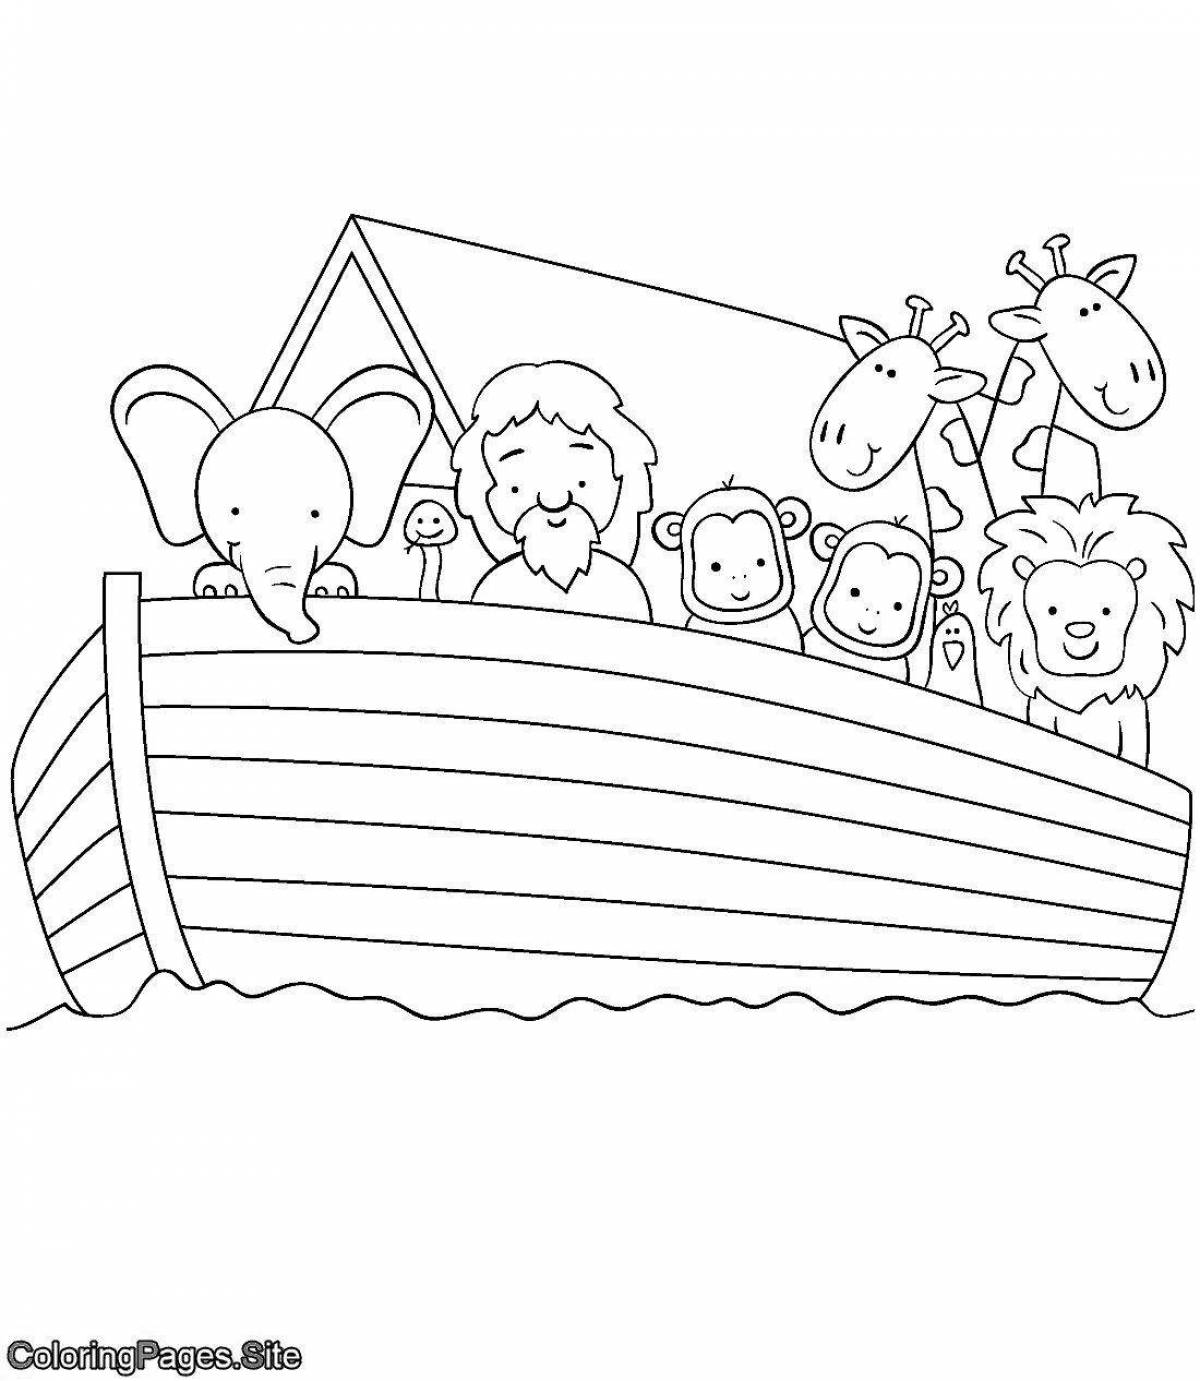 Glowing Noah's Ark coloring page